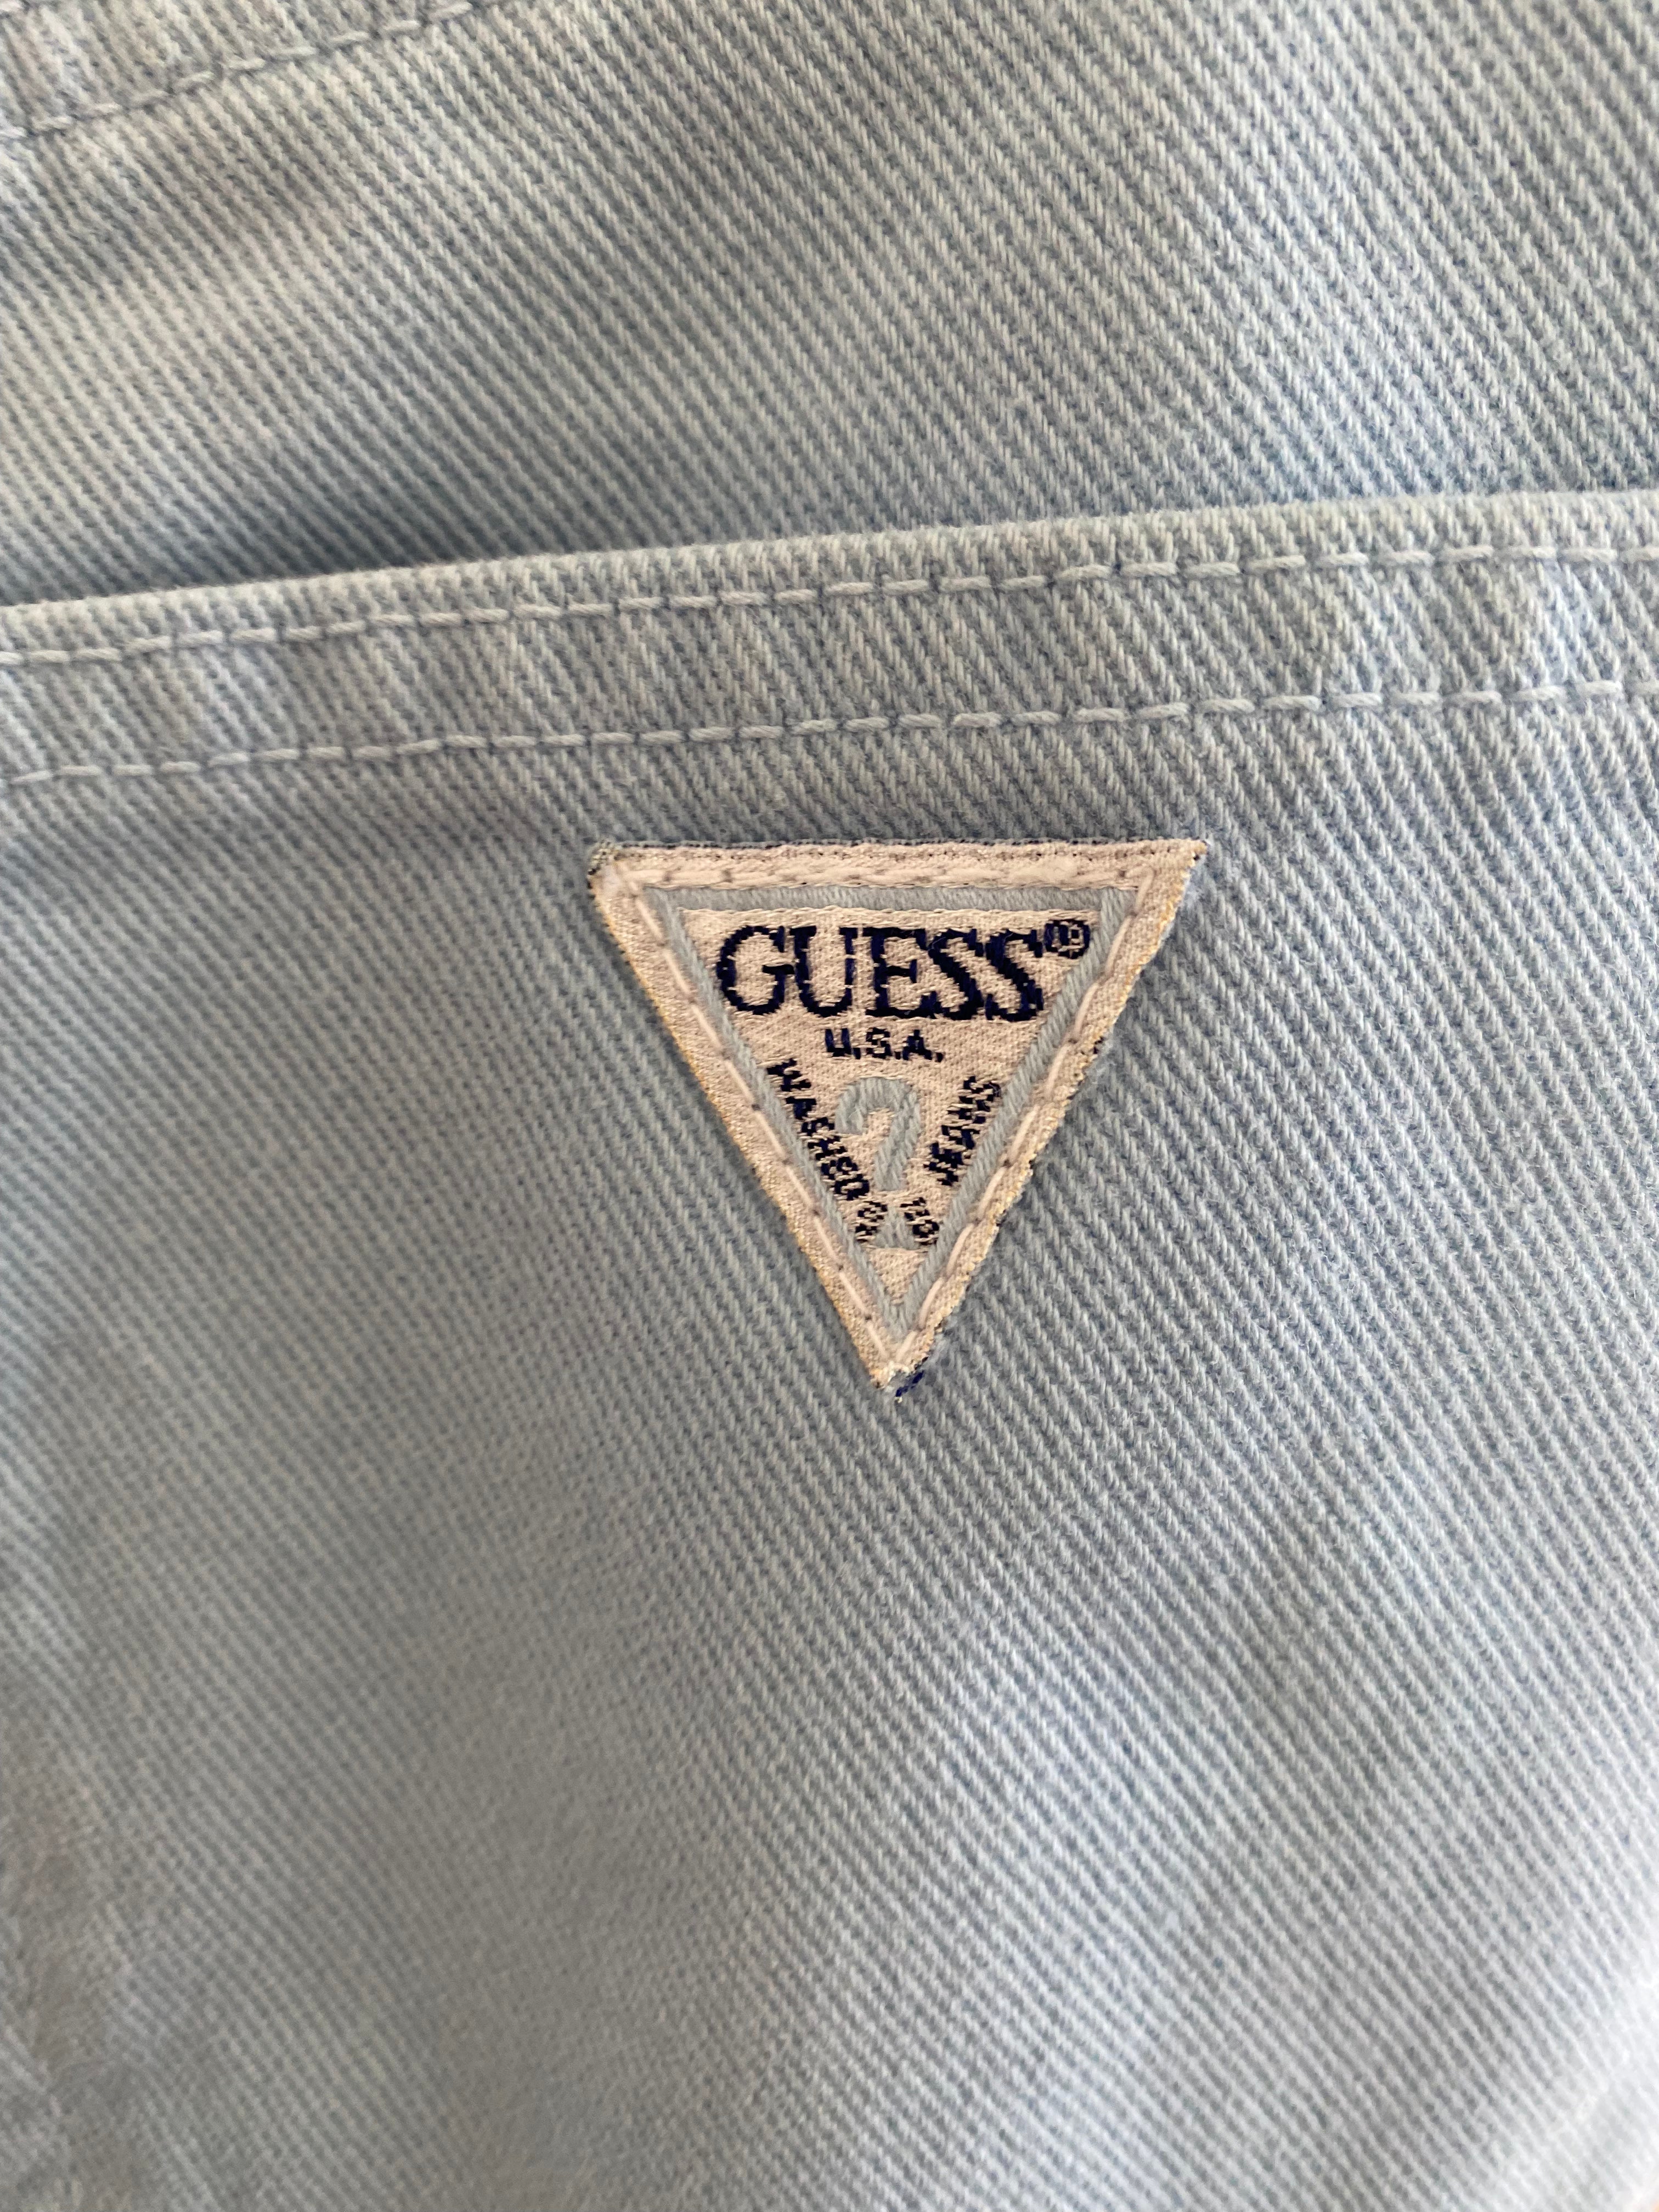 Baby Blue Guess Jean